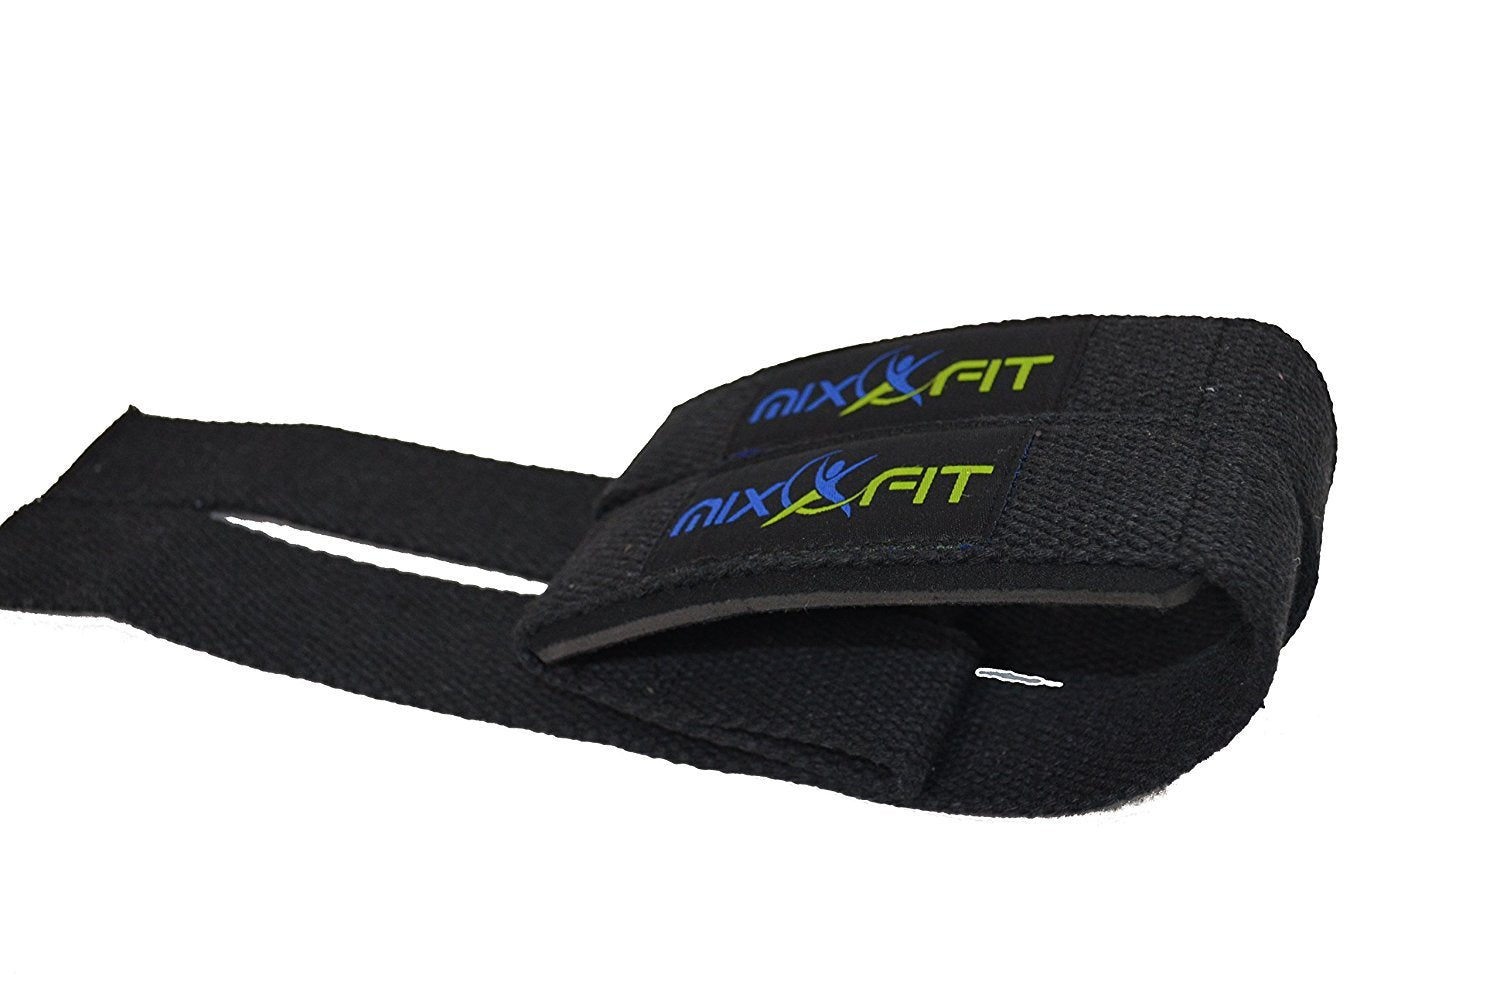 Mixxfit Padded Lifting Straps for Heavy Weight Lifting and Pulling Exercises. 100% Cotton Straps to Ensure Proper Gripping of Dumbbells or Barbells During Dead Lifts, Shoulder Shrugs or Pull-ups. Ensure You Max Out with the Right Weight on Every Rep.